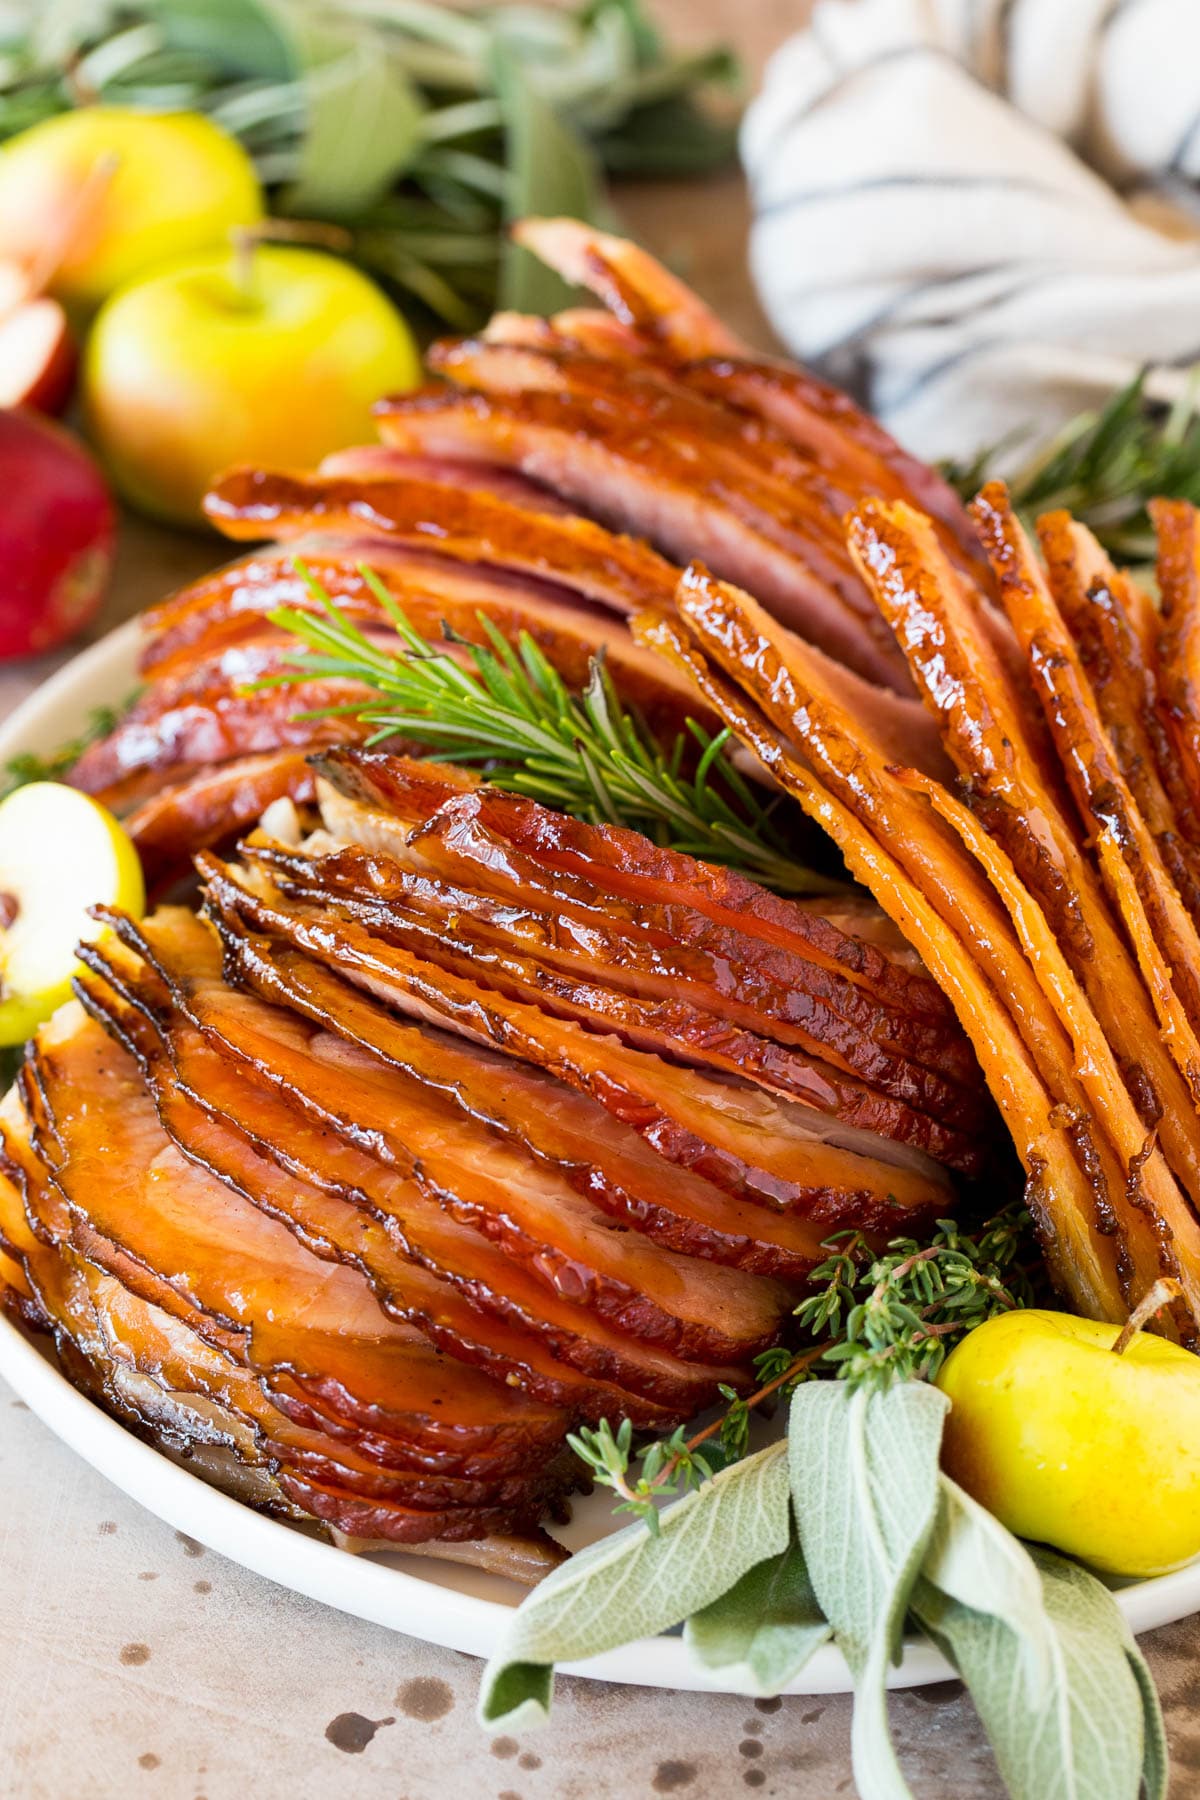 Sliced Easter ham on a plate garnished with herbs and apples.